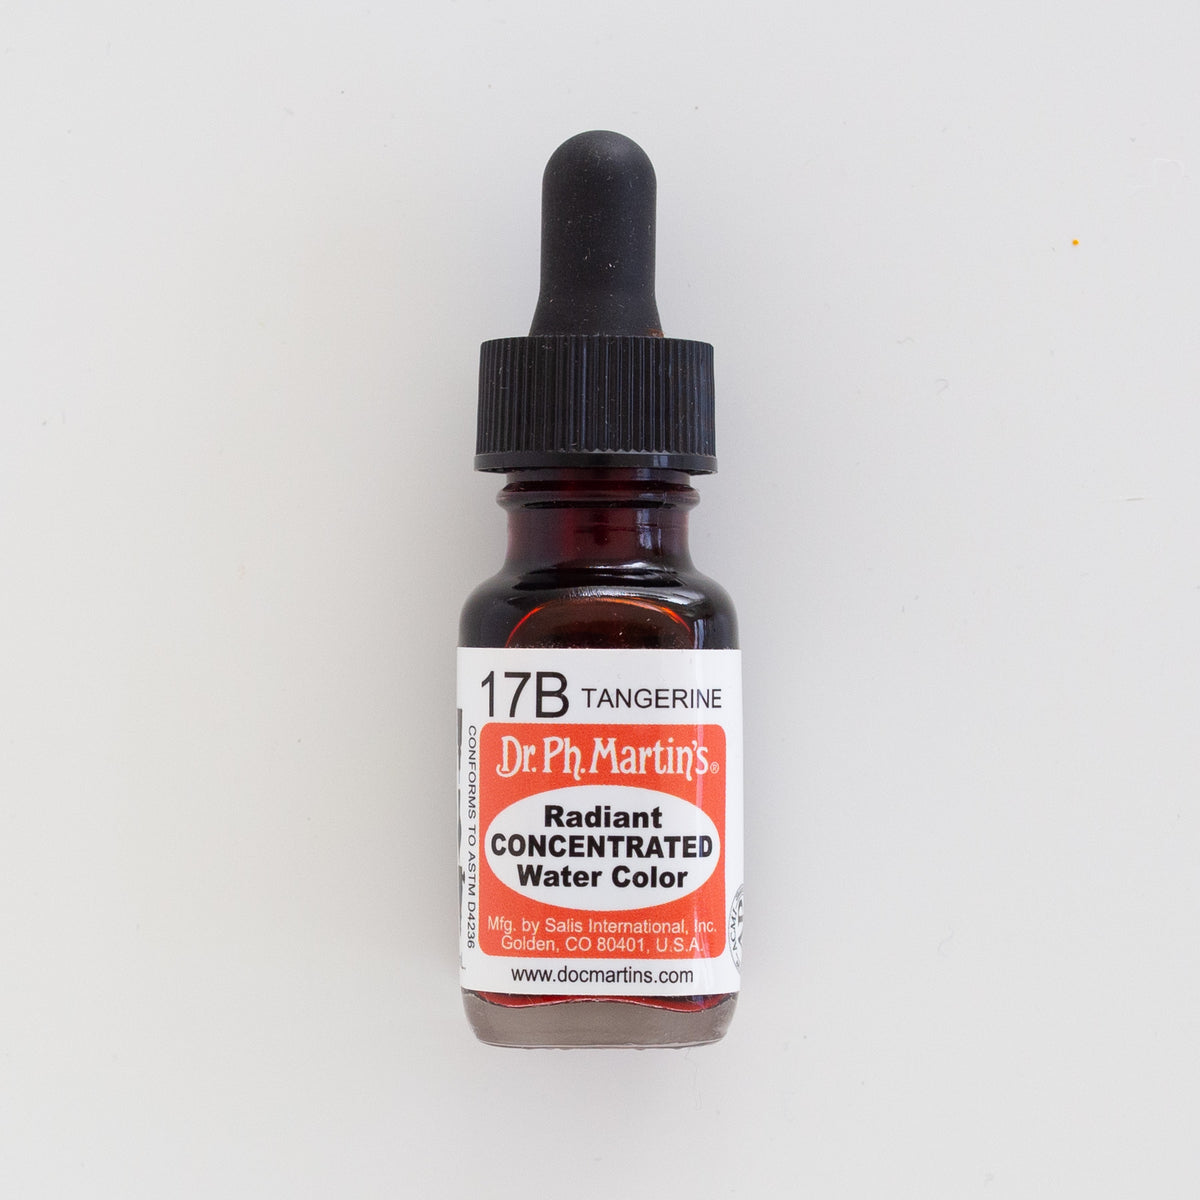 Dr. Ph. Martin’s Radiant Concentrated 17B Tangerine